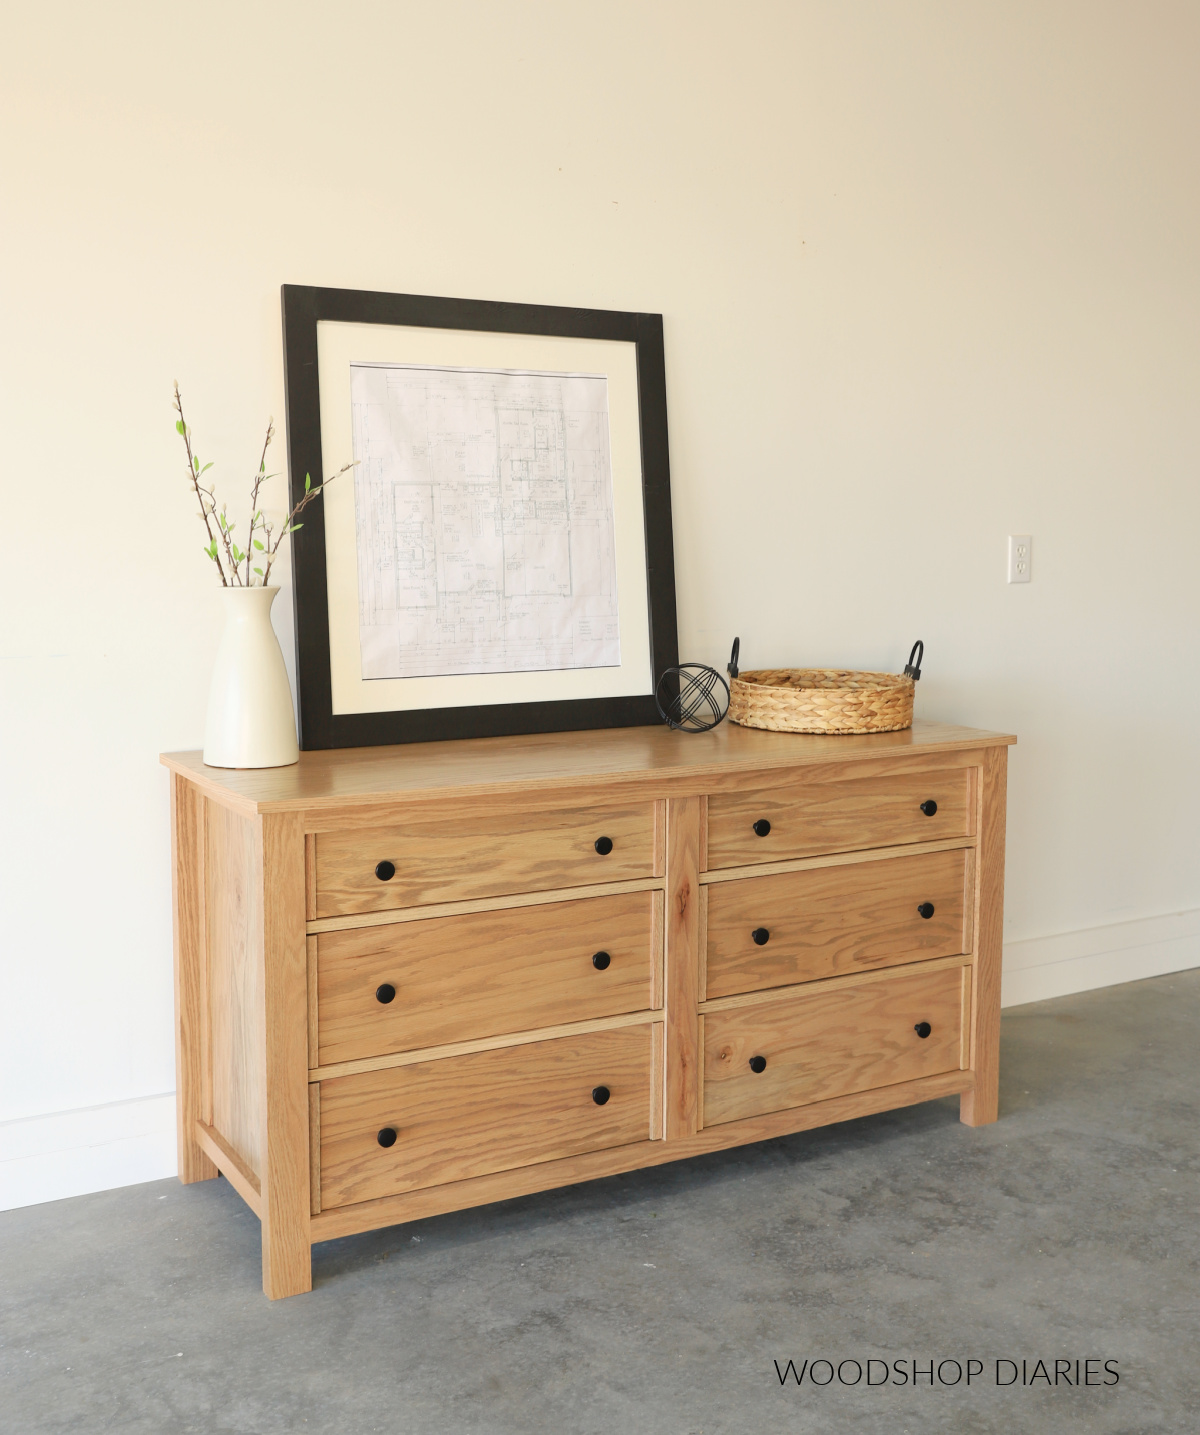 Finished 6 drawer red oak modern dresser build against white wall stained in Weathered Oak